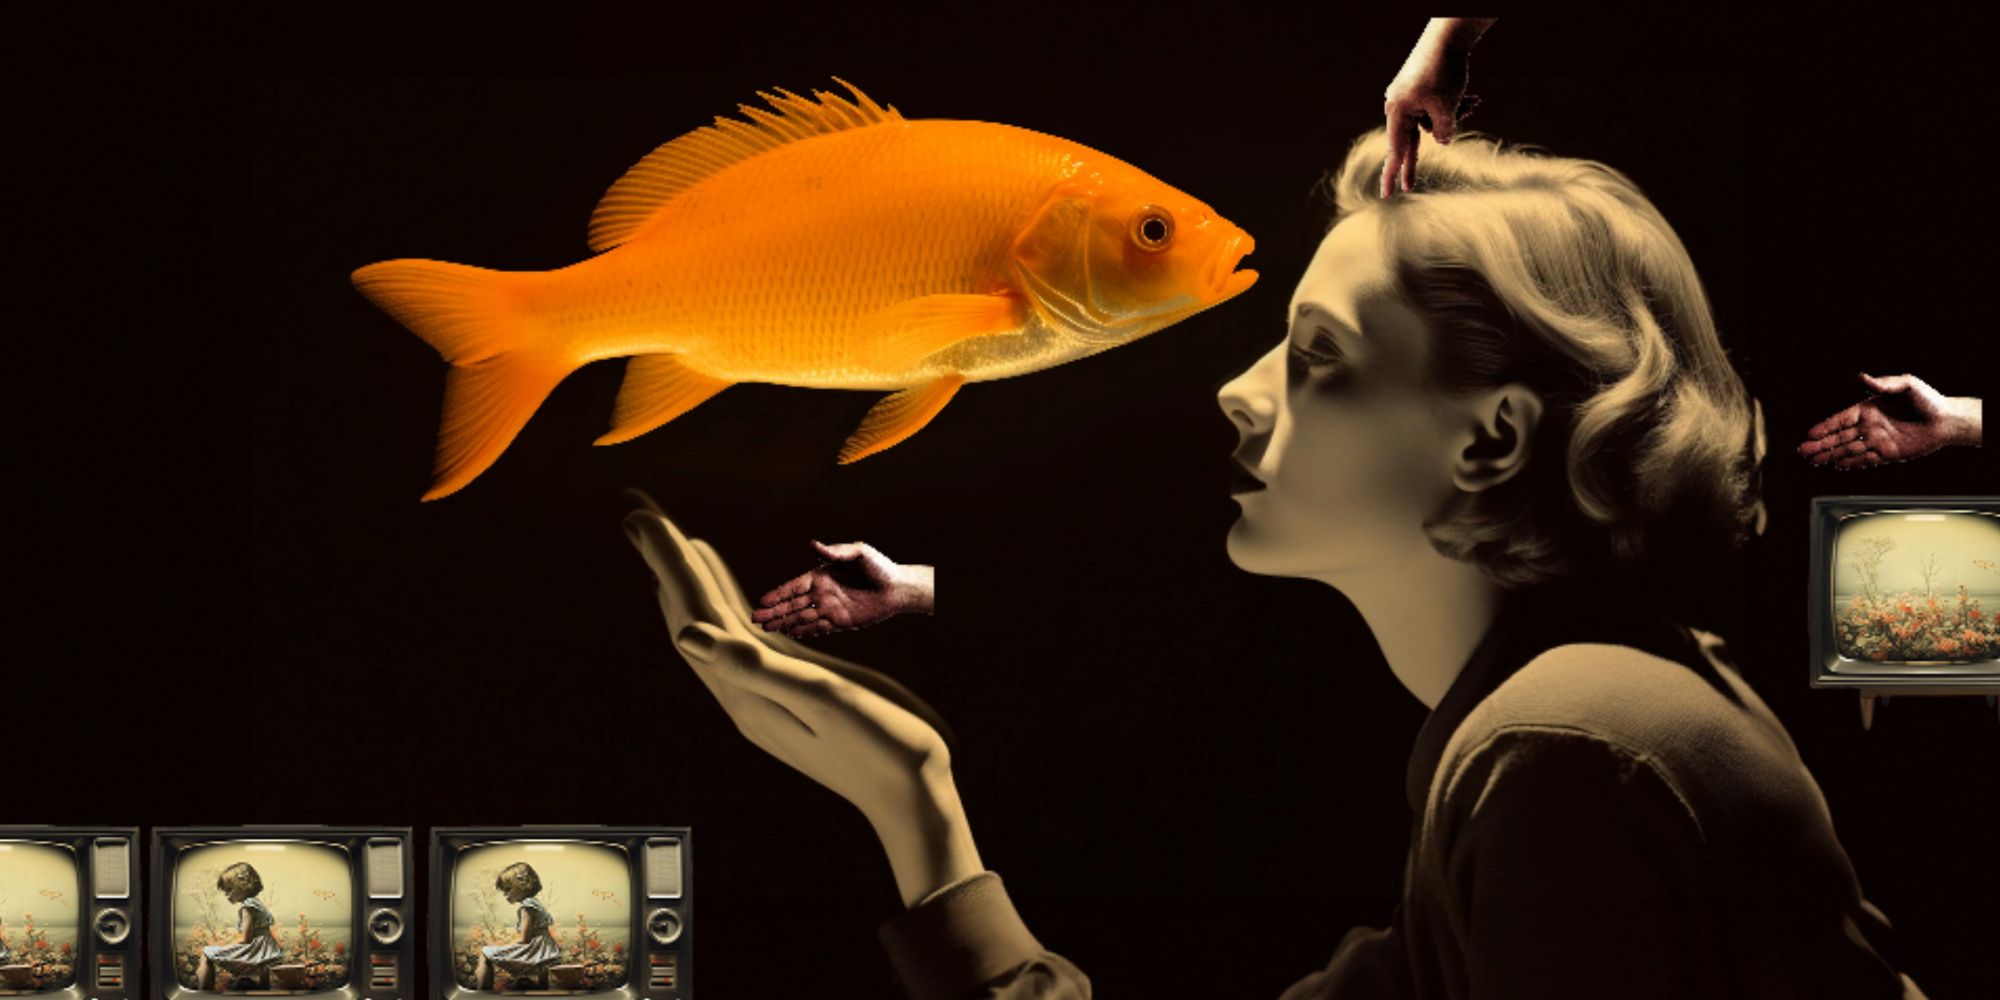 Hands, A Lady With A Giant Goldfish Floating By Her Head Surrounded By Hands And TVs